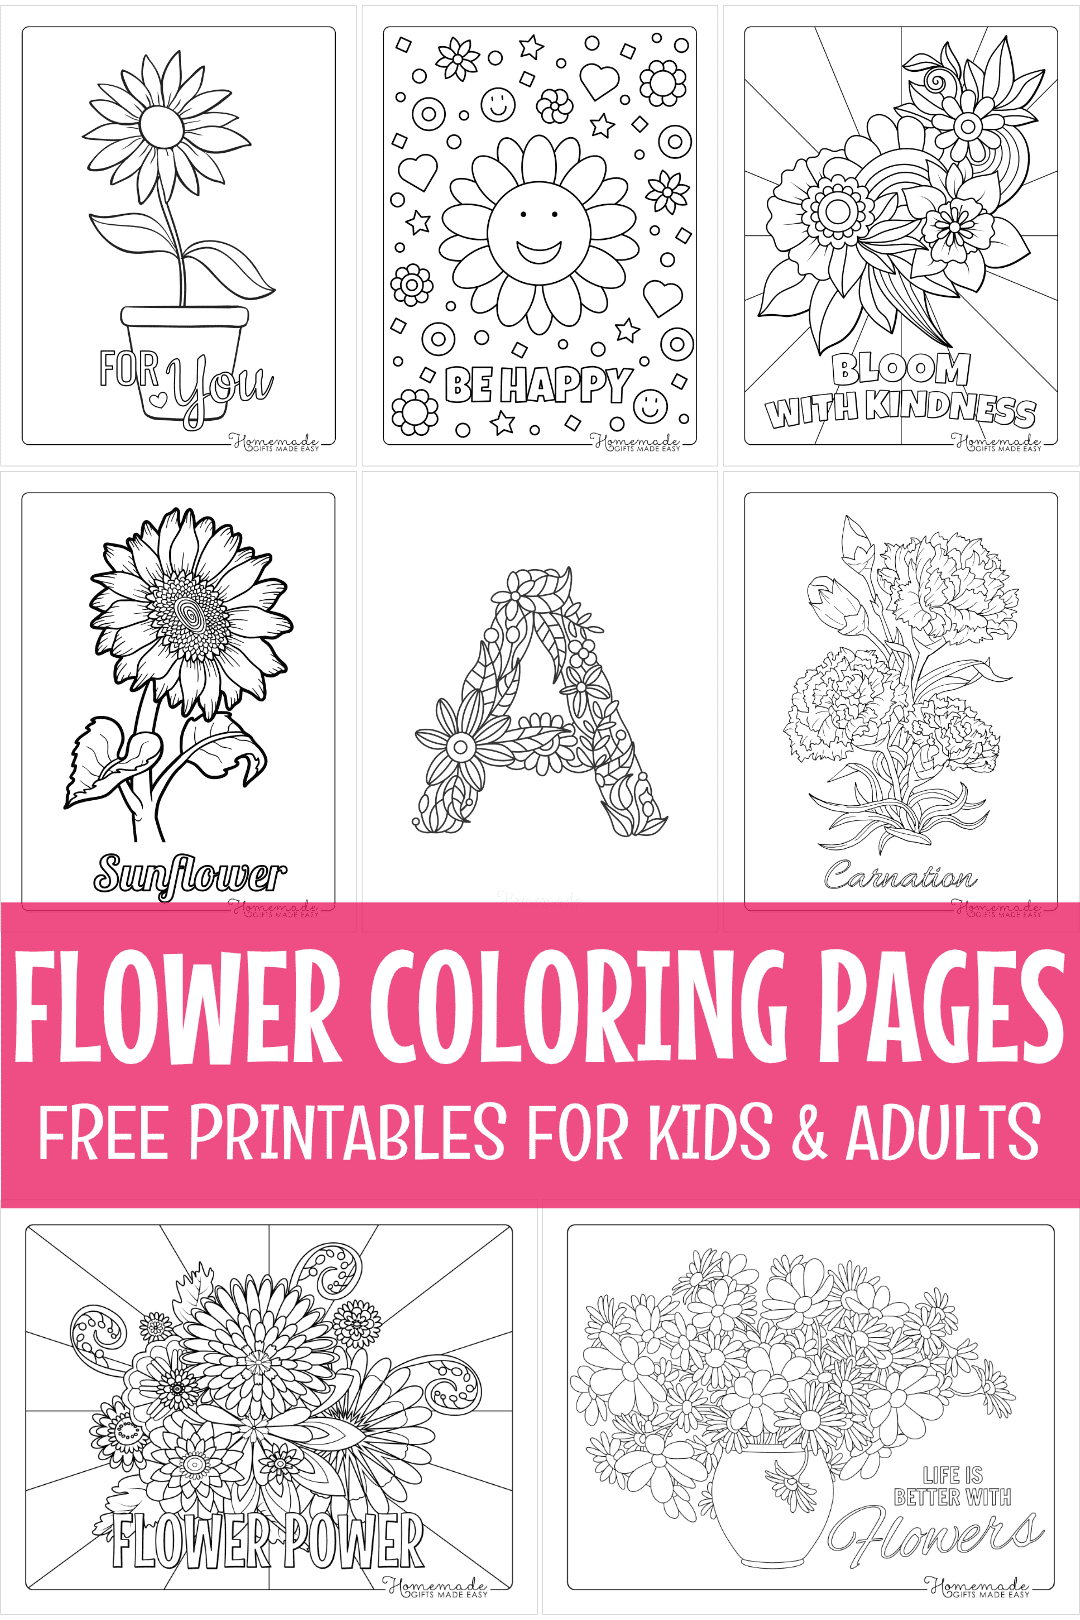 112 Beautiful Flower Coloring Pages Free Printables For Kids Adults